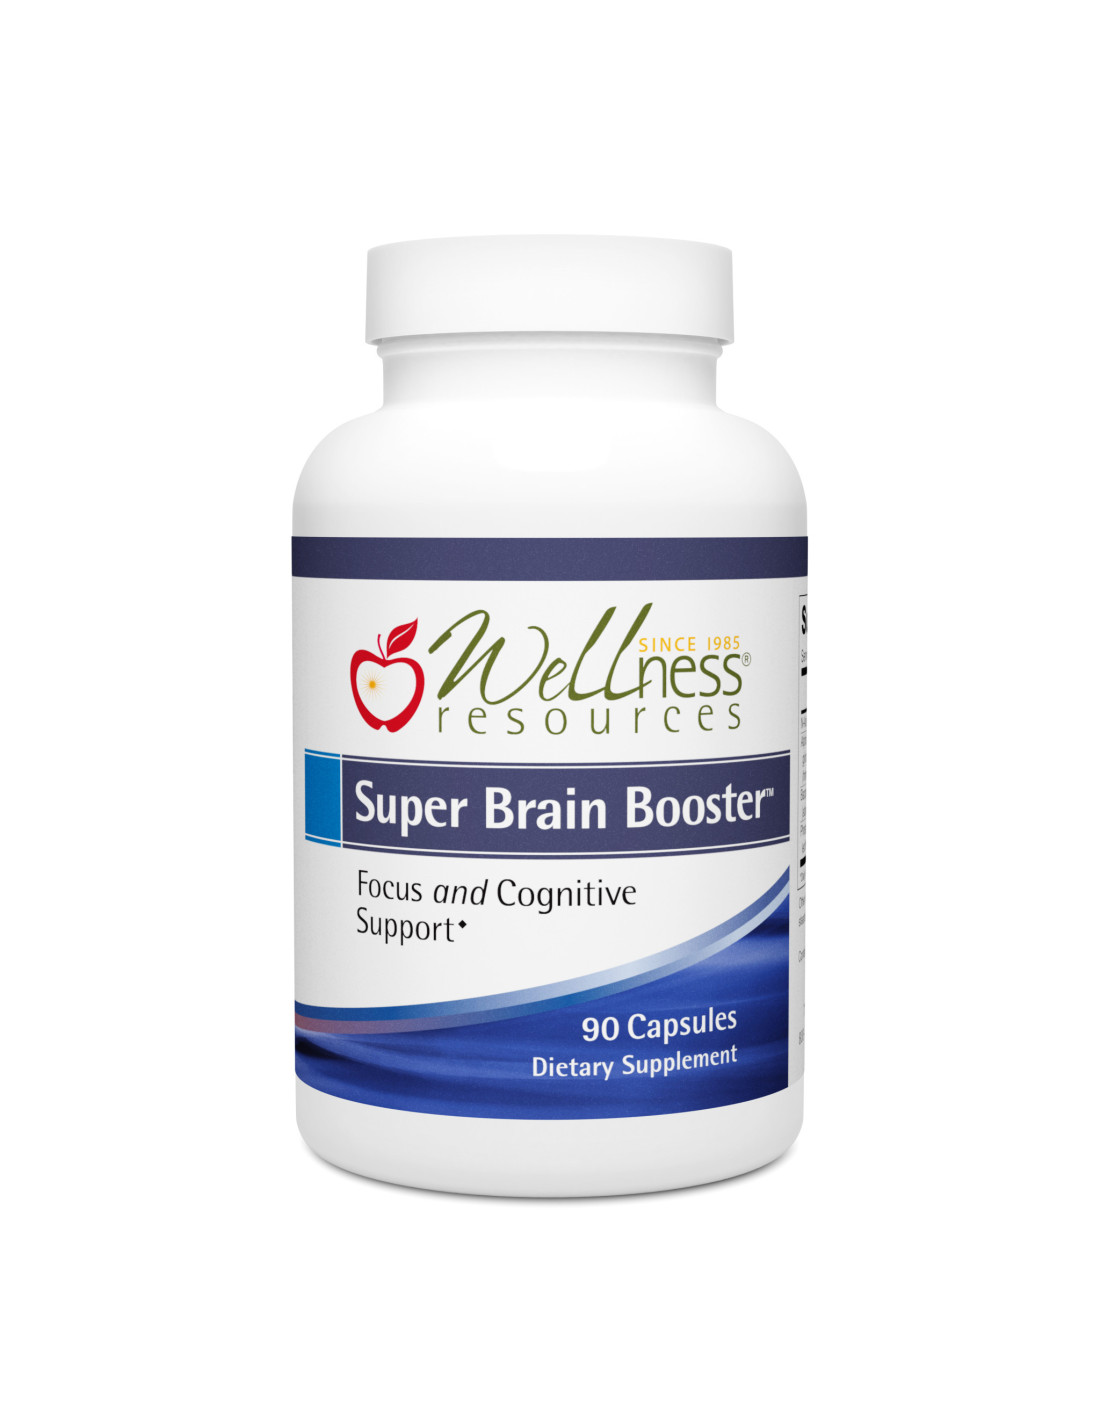 Super Brain Booster - Best Supplement for Focus and Cognitive Function